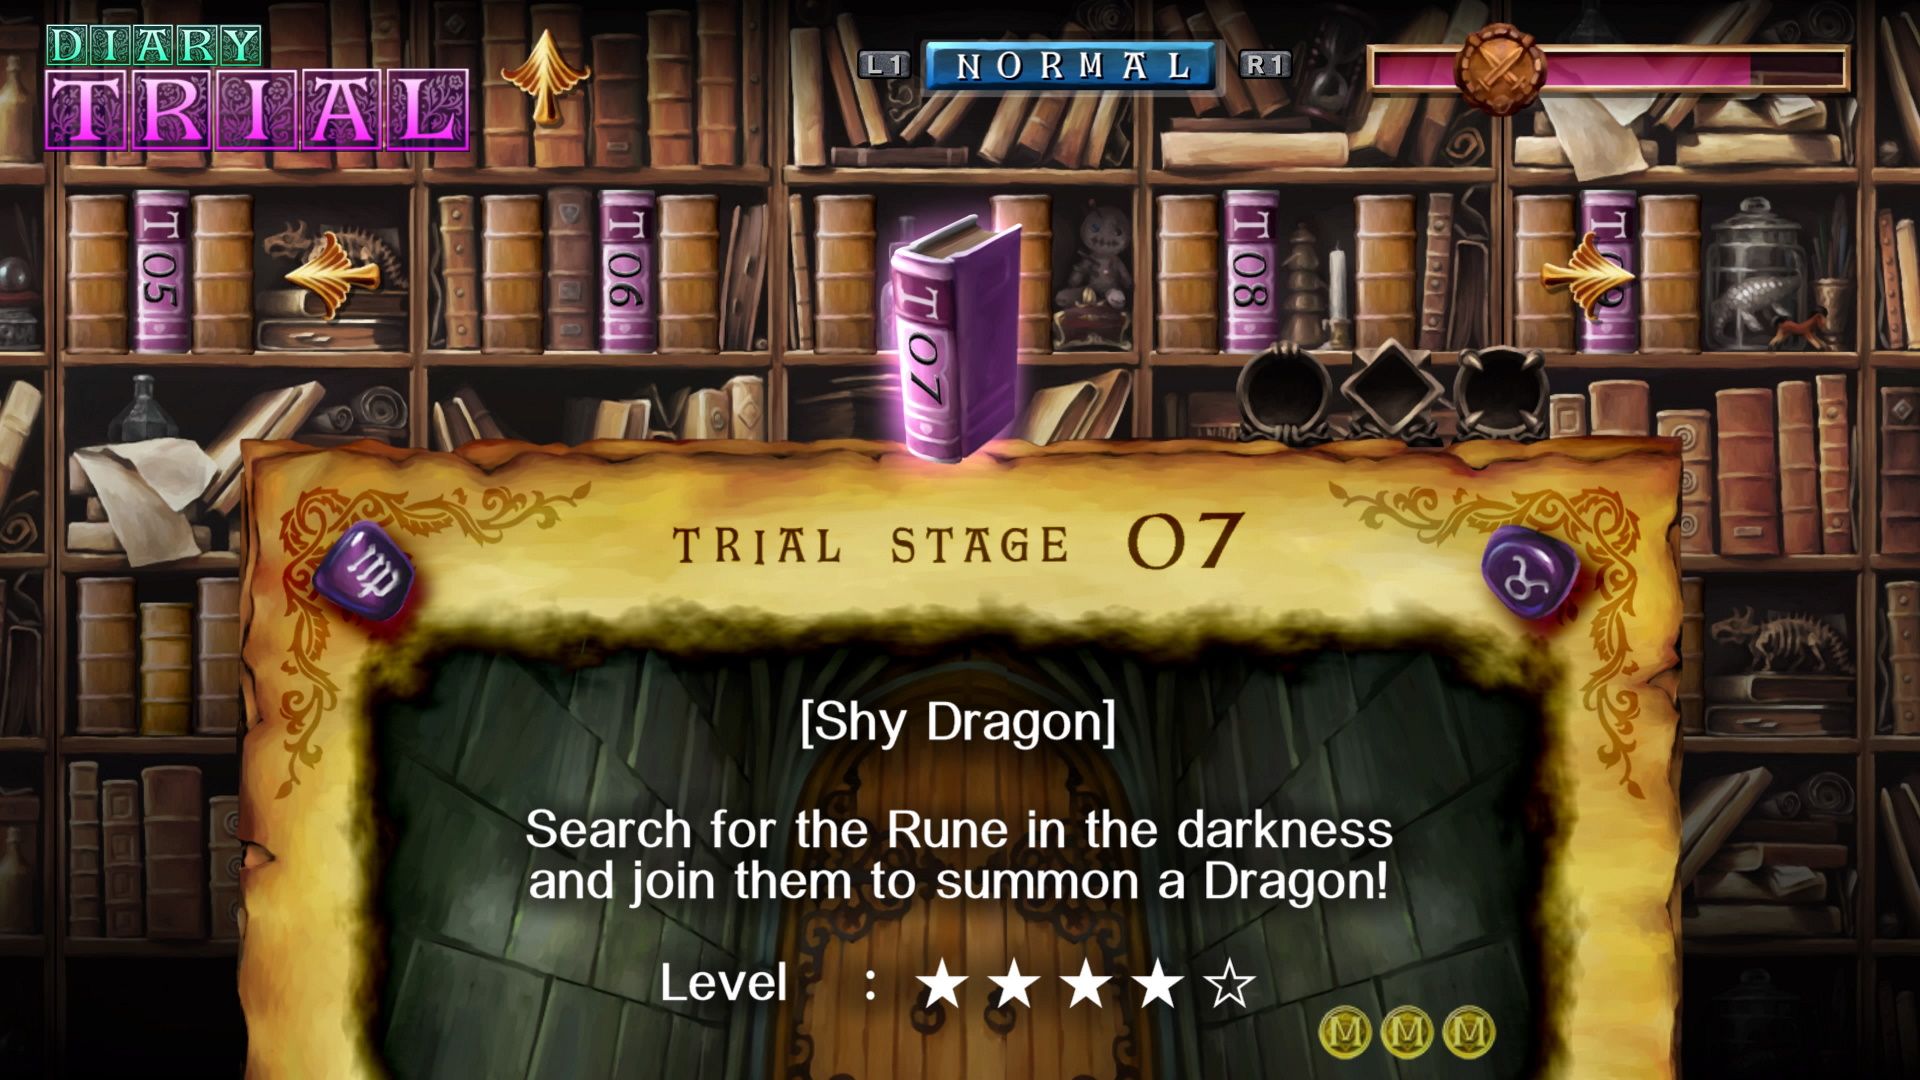 GrimGrimoire OnceMore, Showing a Trial Stage worth three coins